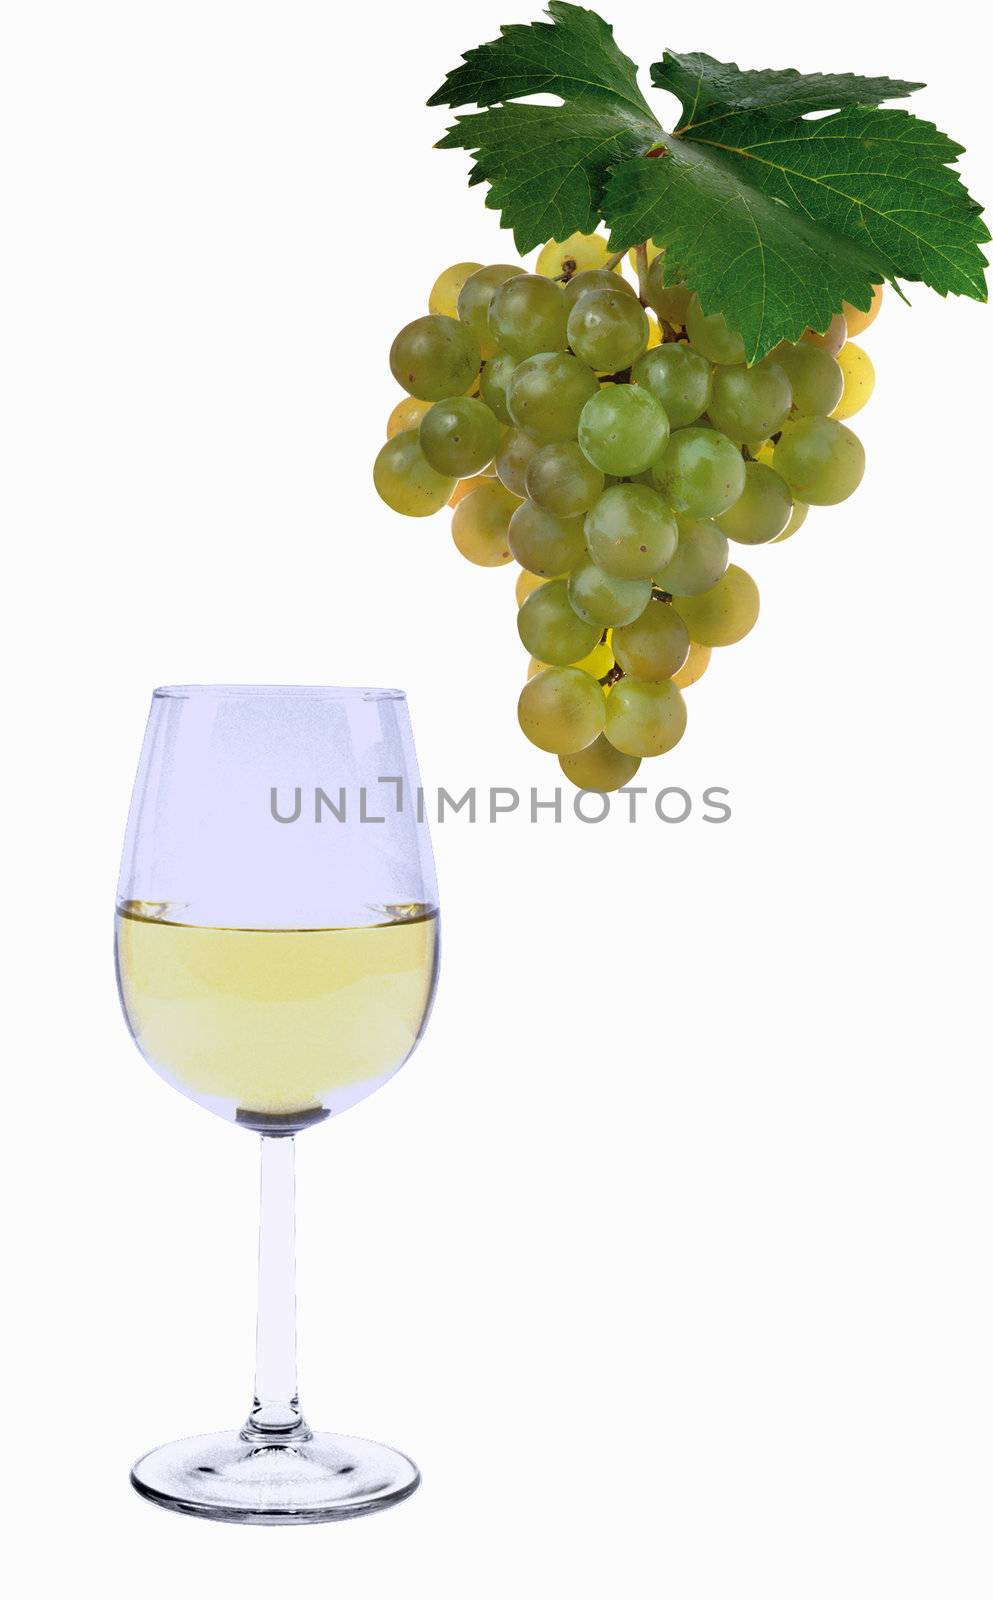 Yellow grapes and a glass of vine